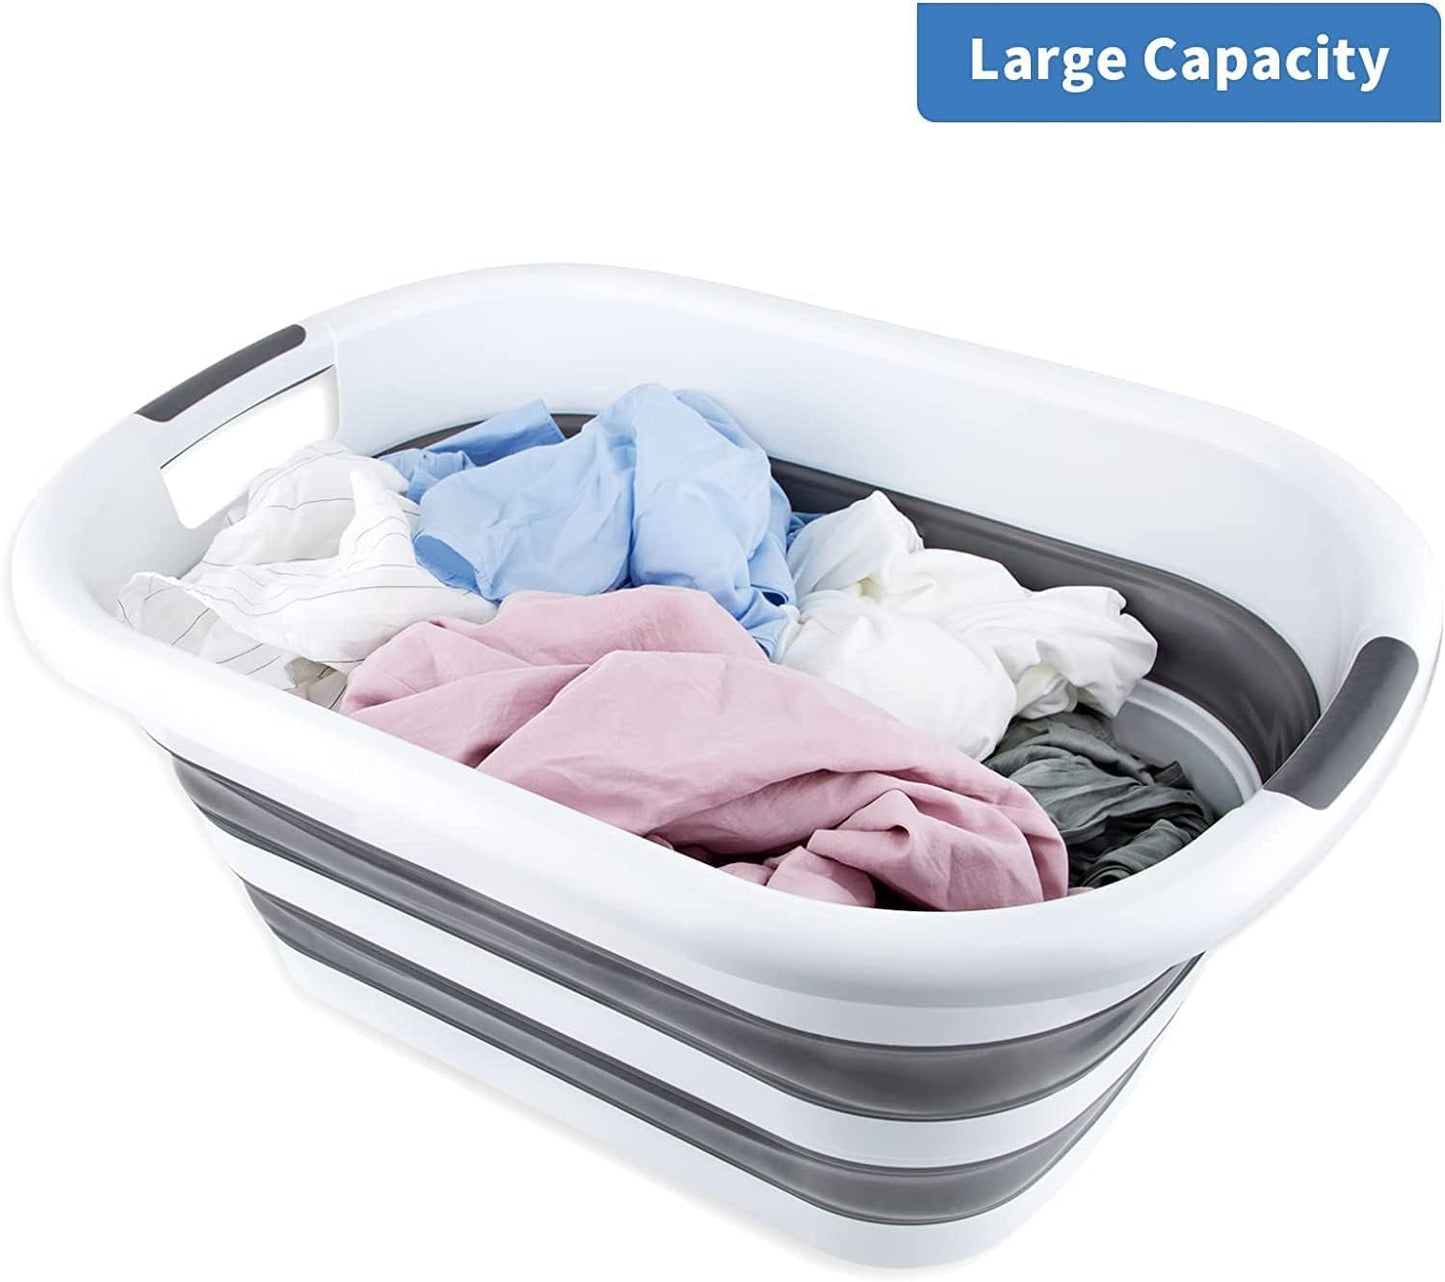 Large foldable laundry basket,40L 10.6 gallon pop up storage container, collapsible space saving organiser hamper,for washing and kitchen,toy storage bin Dog Bathtub (Large/40L)